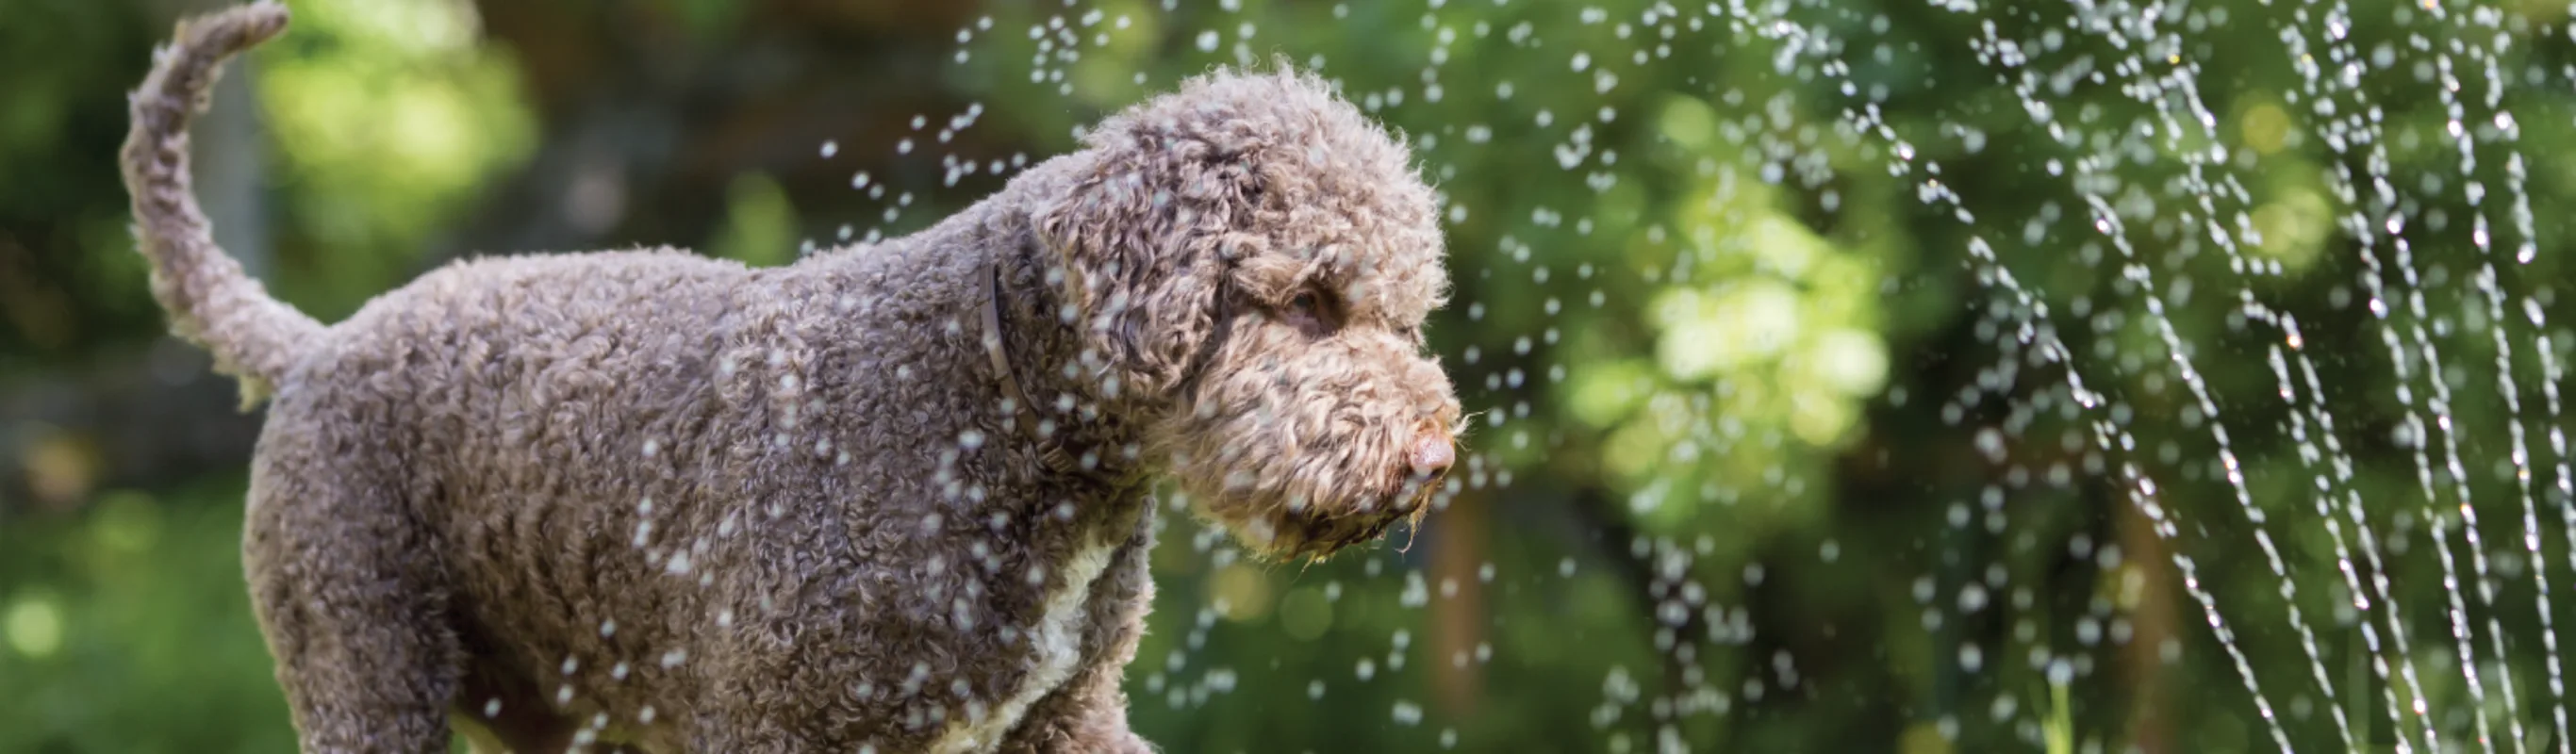 Dog playing with water hose outside